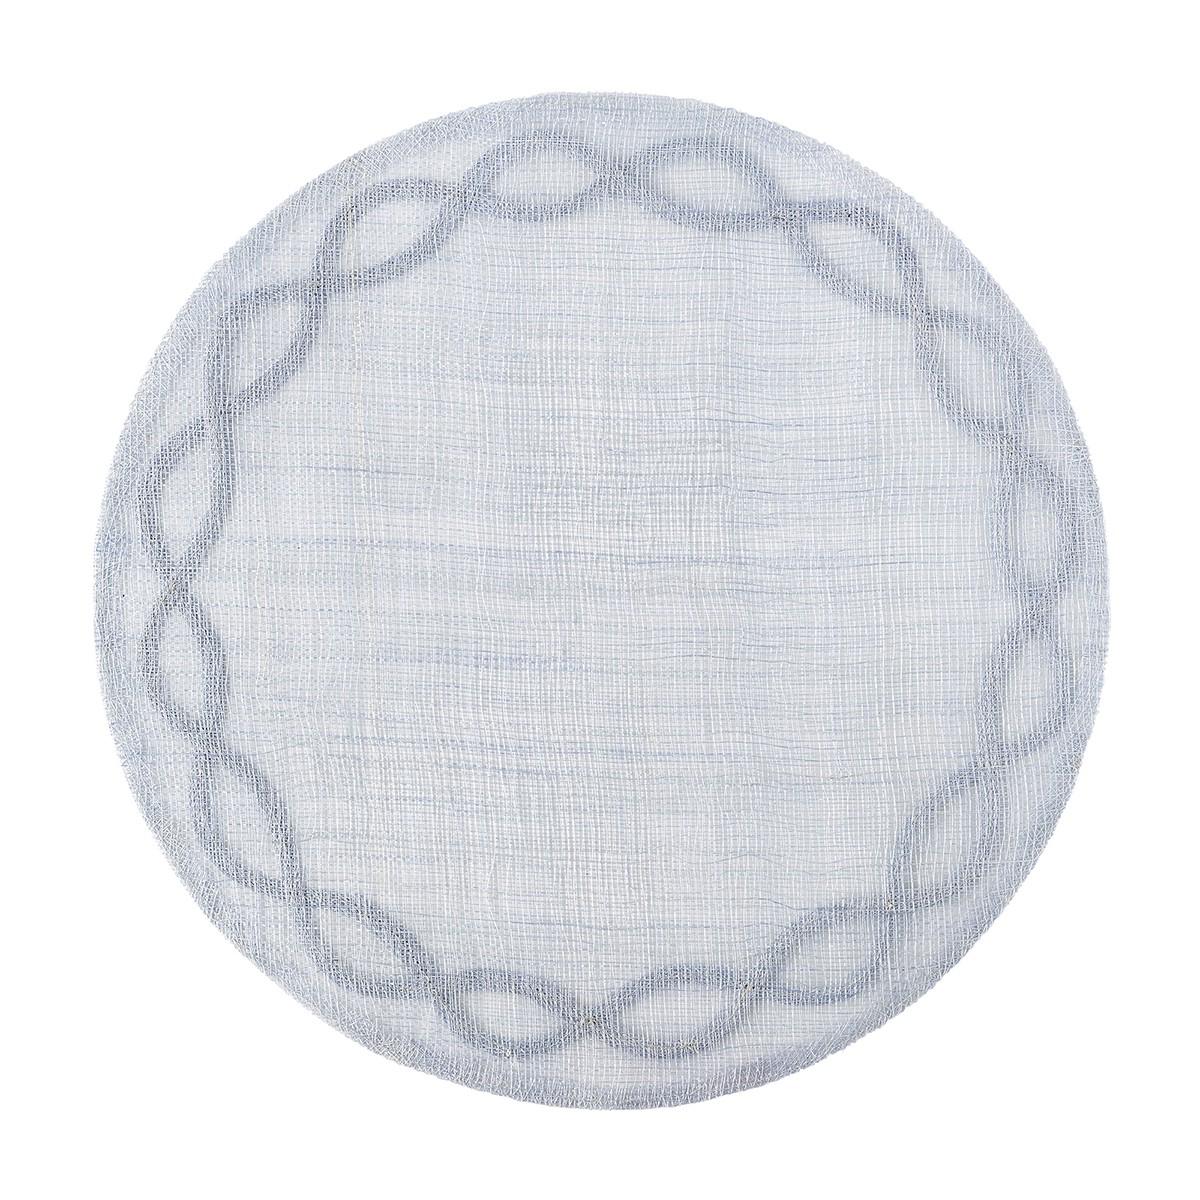 Tuileries Placemat - Chambray